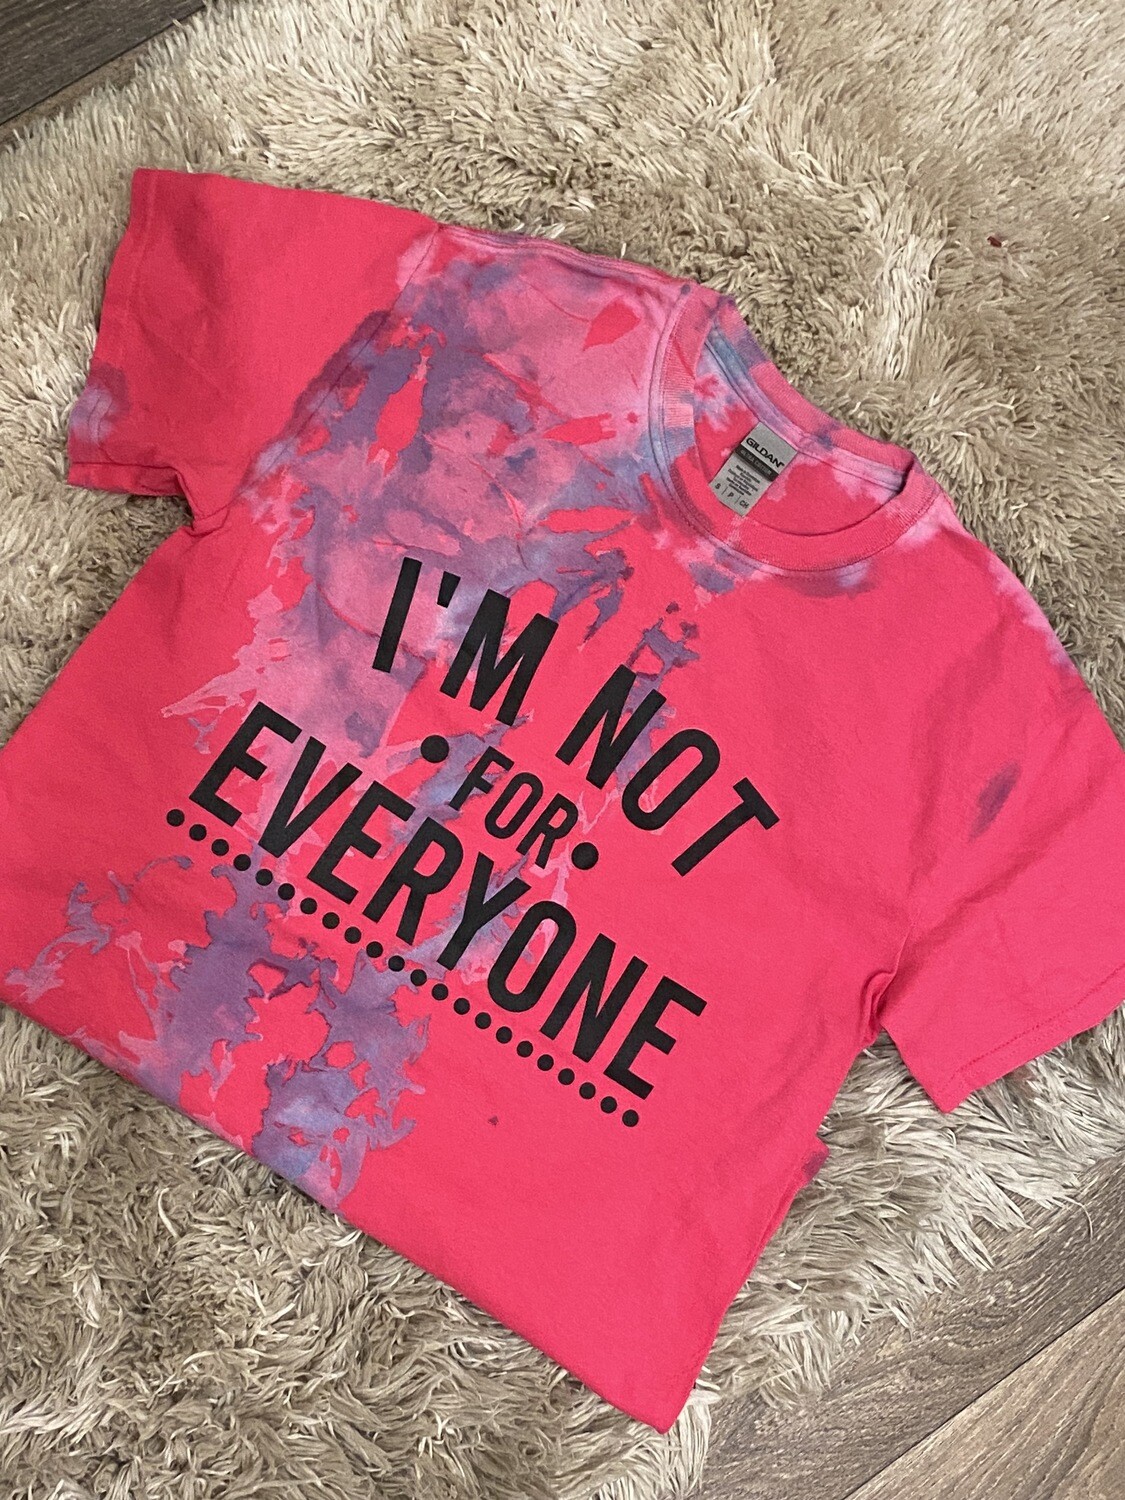 I'm Not For Everyone T-shirt